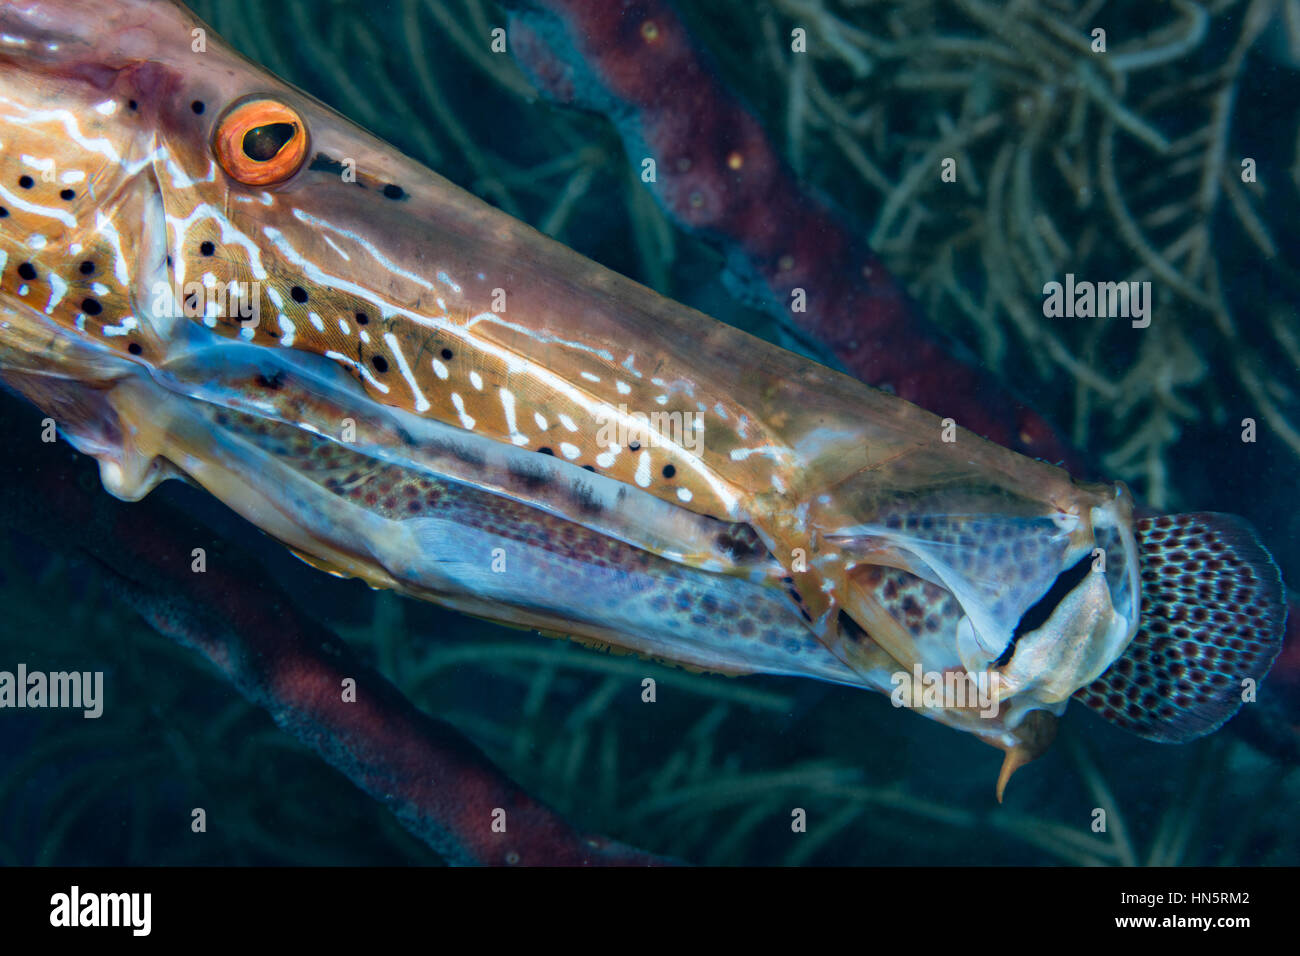 Trumpetfish captures and swallows small member of the grouper family. Stock Photo